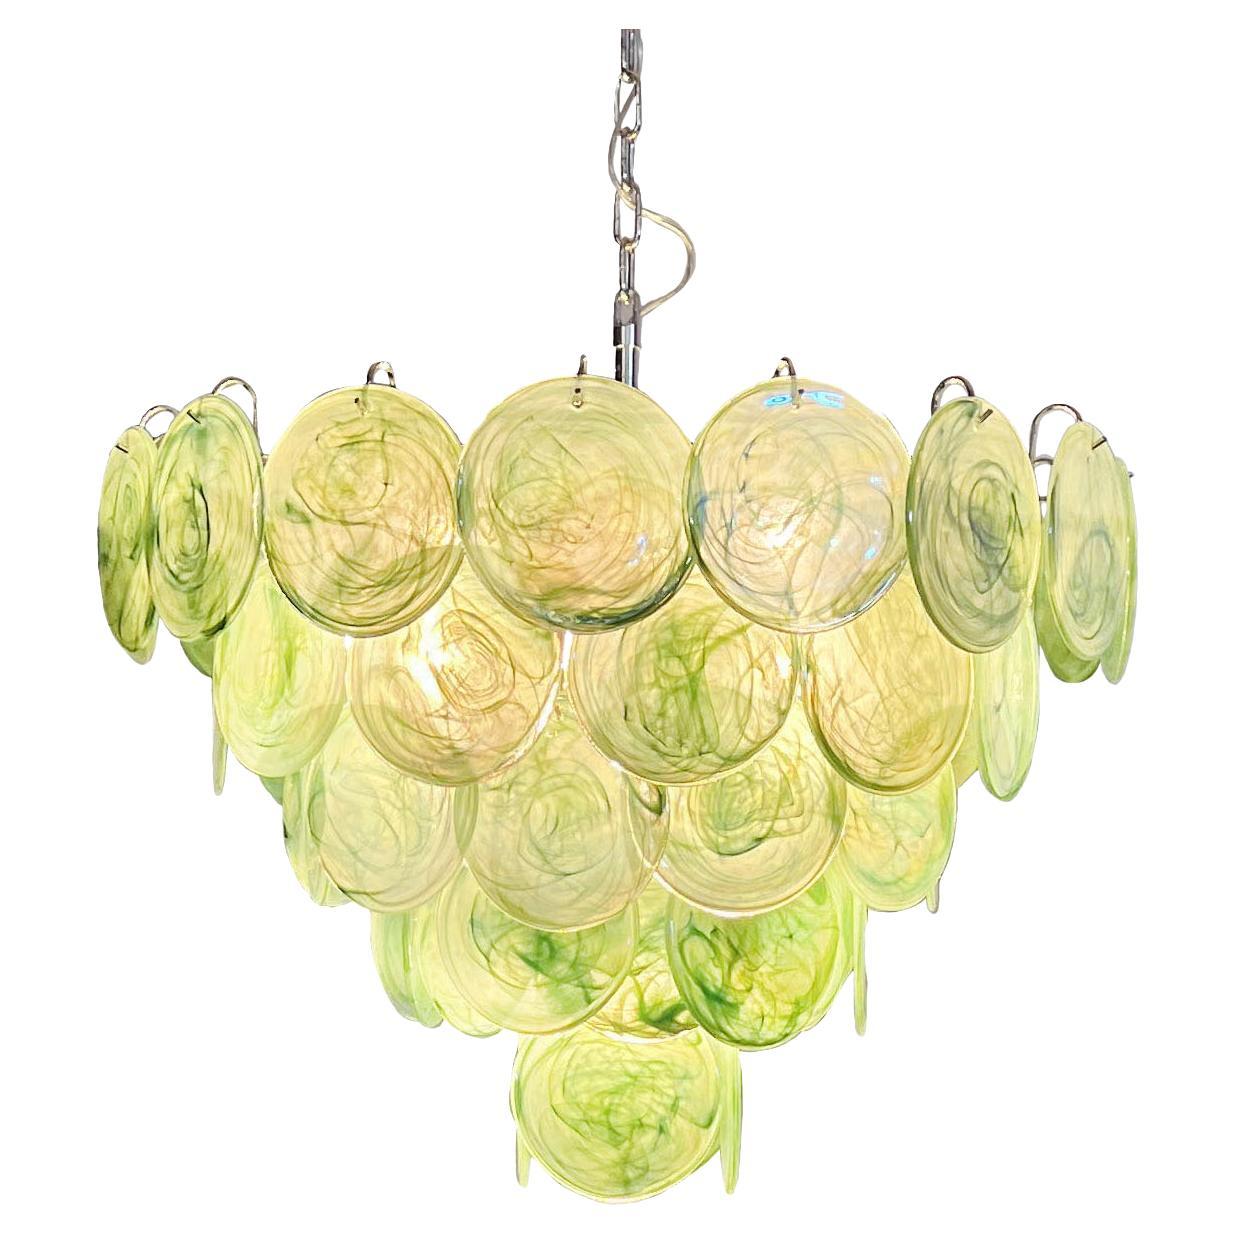 Italian Murano chandelier. The chandelier has 57 Murano GREEN alabaster iridescent glass disks. The glasses are now unavailable, they have the particularity of reflecting a multiplicity of colors, which makes the chandelier a true work of art.